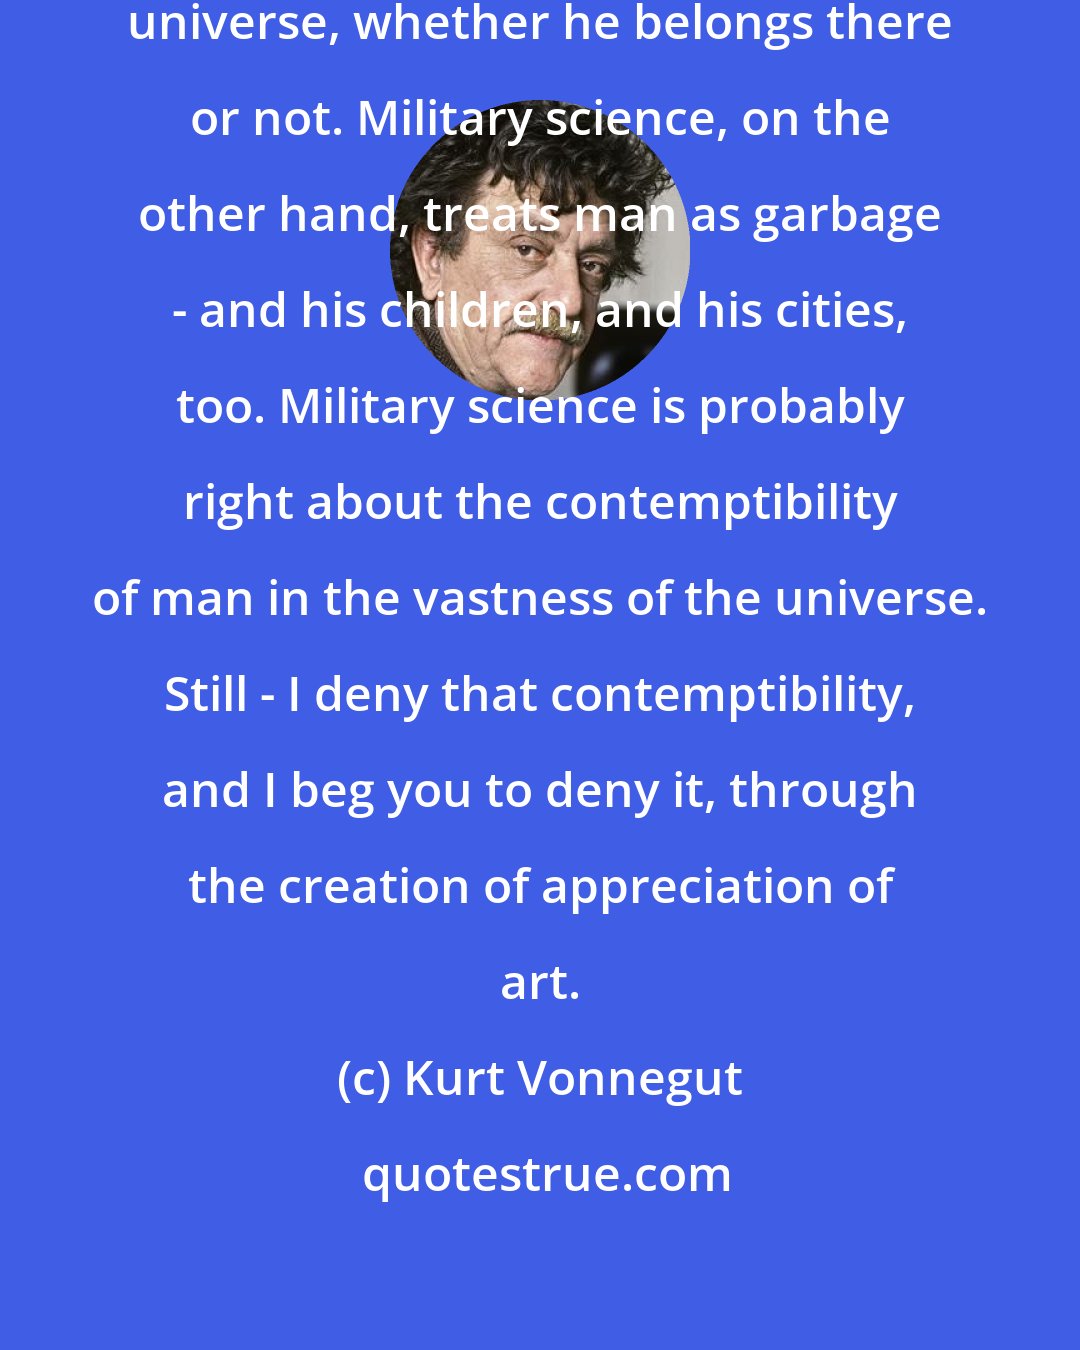 Kurt Vonnegut: The arts put man at the center of the universe, whether he belongs there or not. Military science, on the other hand, treats man as garbage - and his children, and his cities, too. Military science is probably right about the contemptibility of man in the vastness of the universe. Still - I deny that contemptibility, and I beg you to deny it, through the creation of appreciation of art.